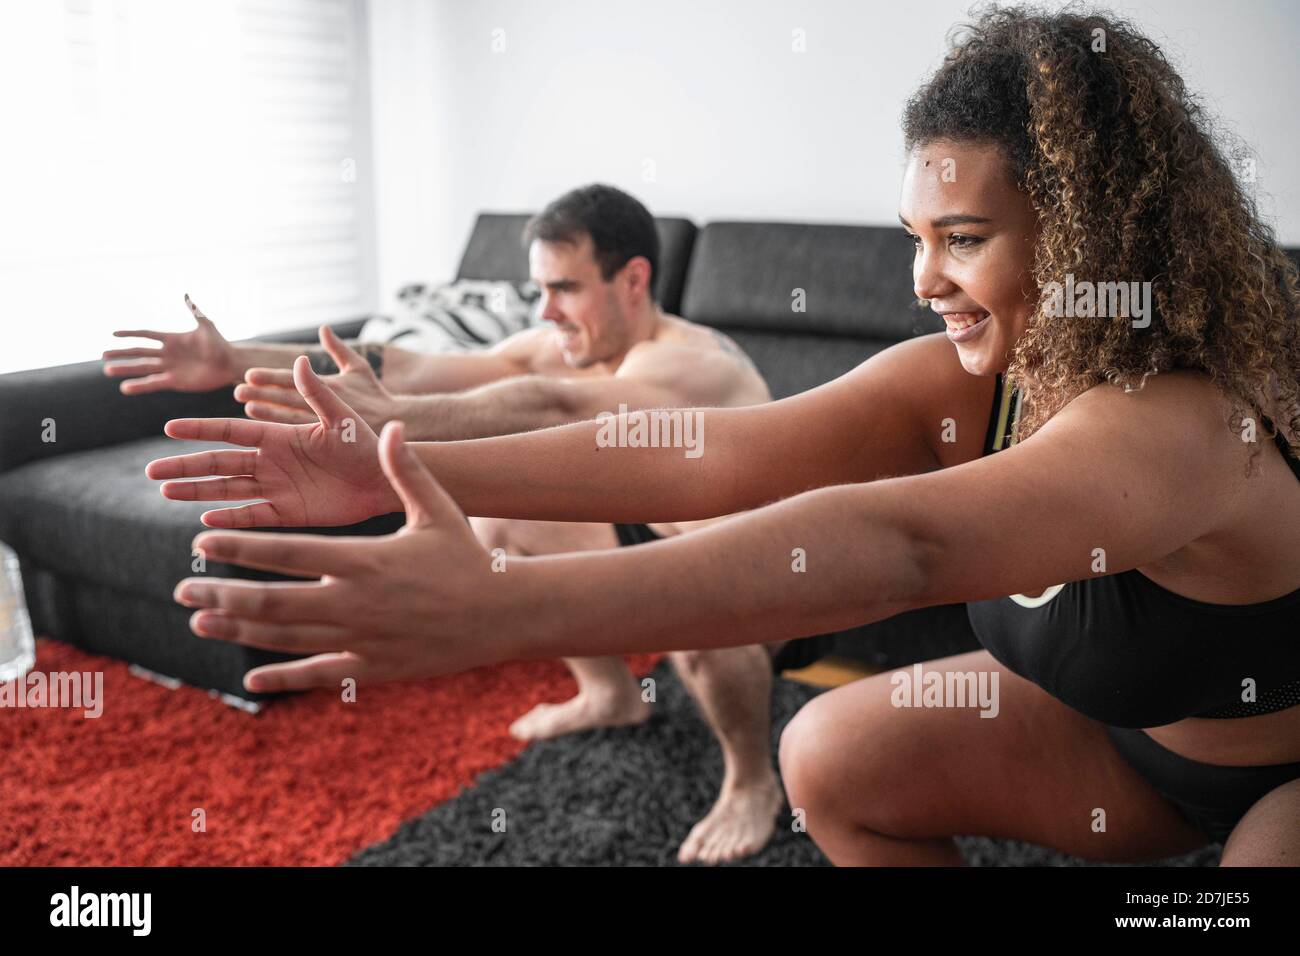 Couple crouching while exercising together at home Stock Photo